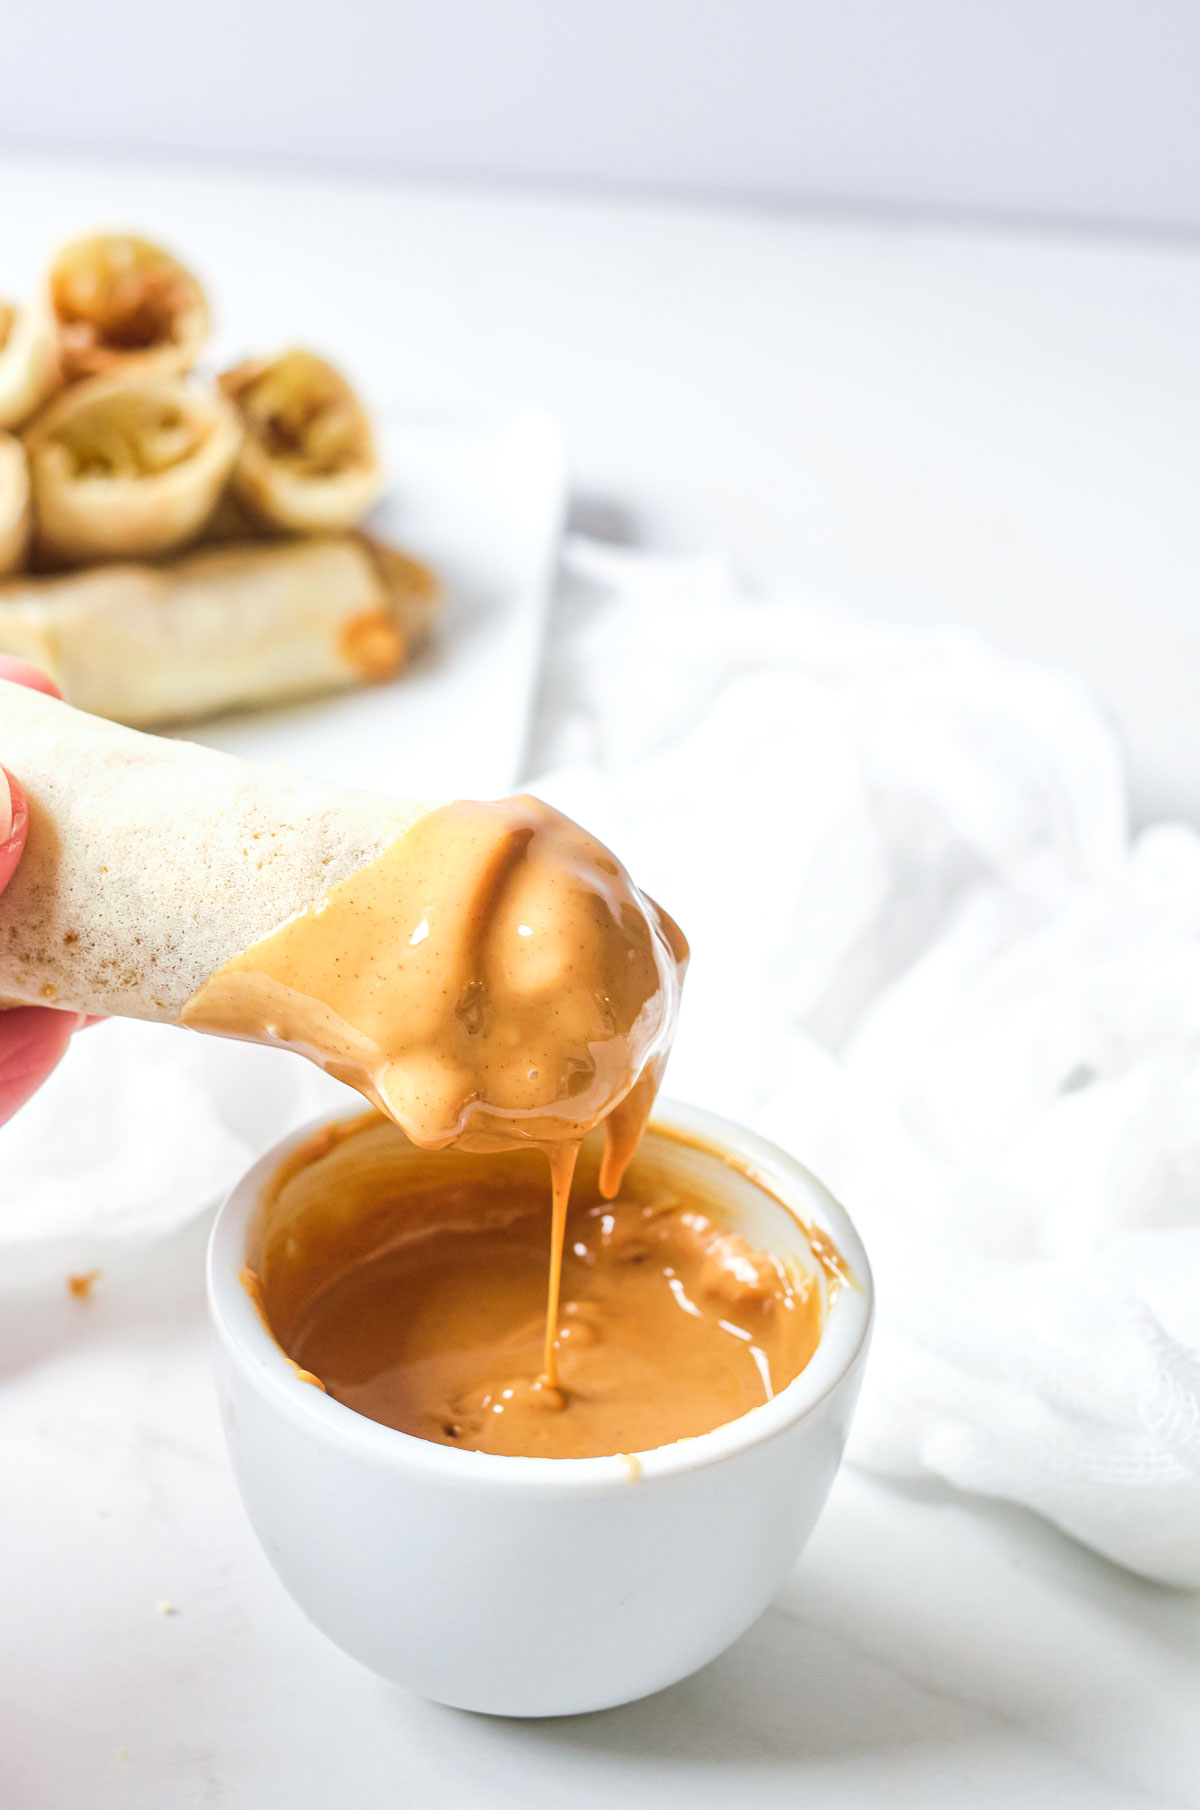 peanut butter banana spring roll being dipped in peanut butter sauce